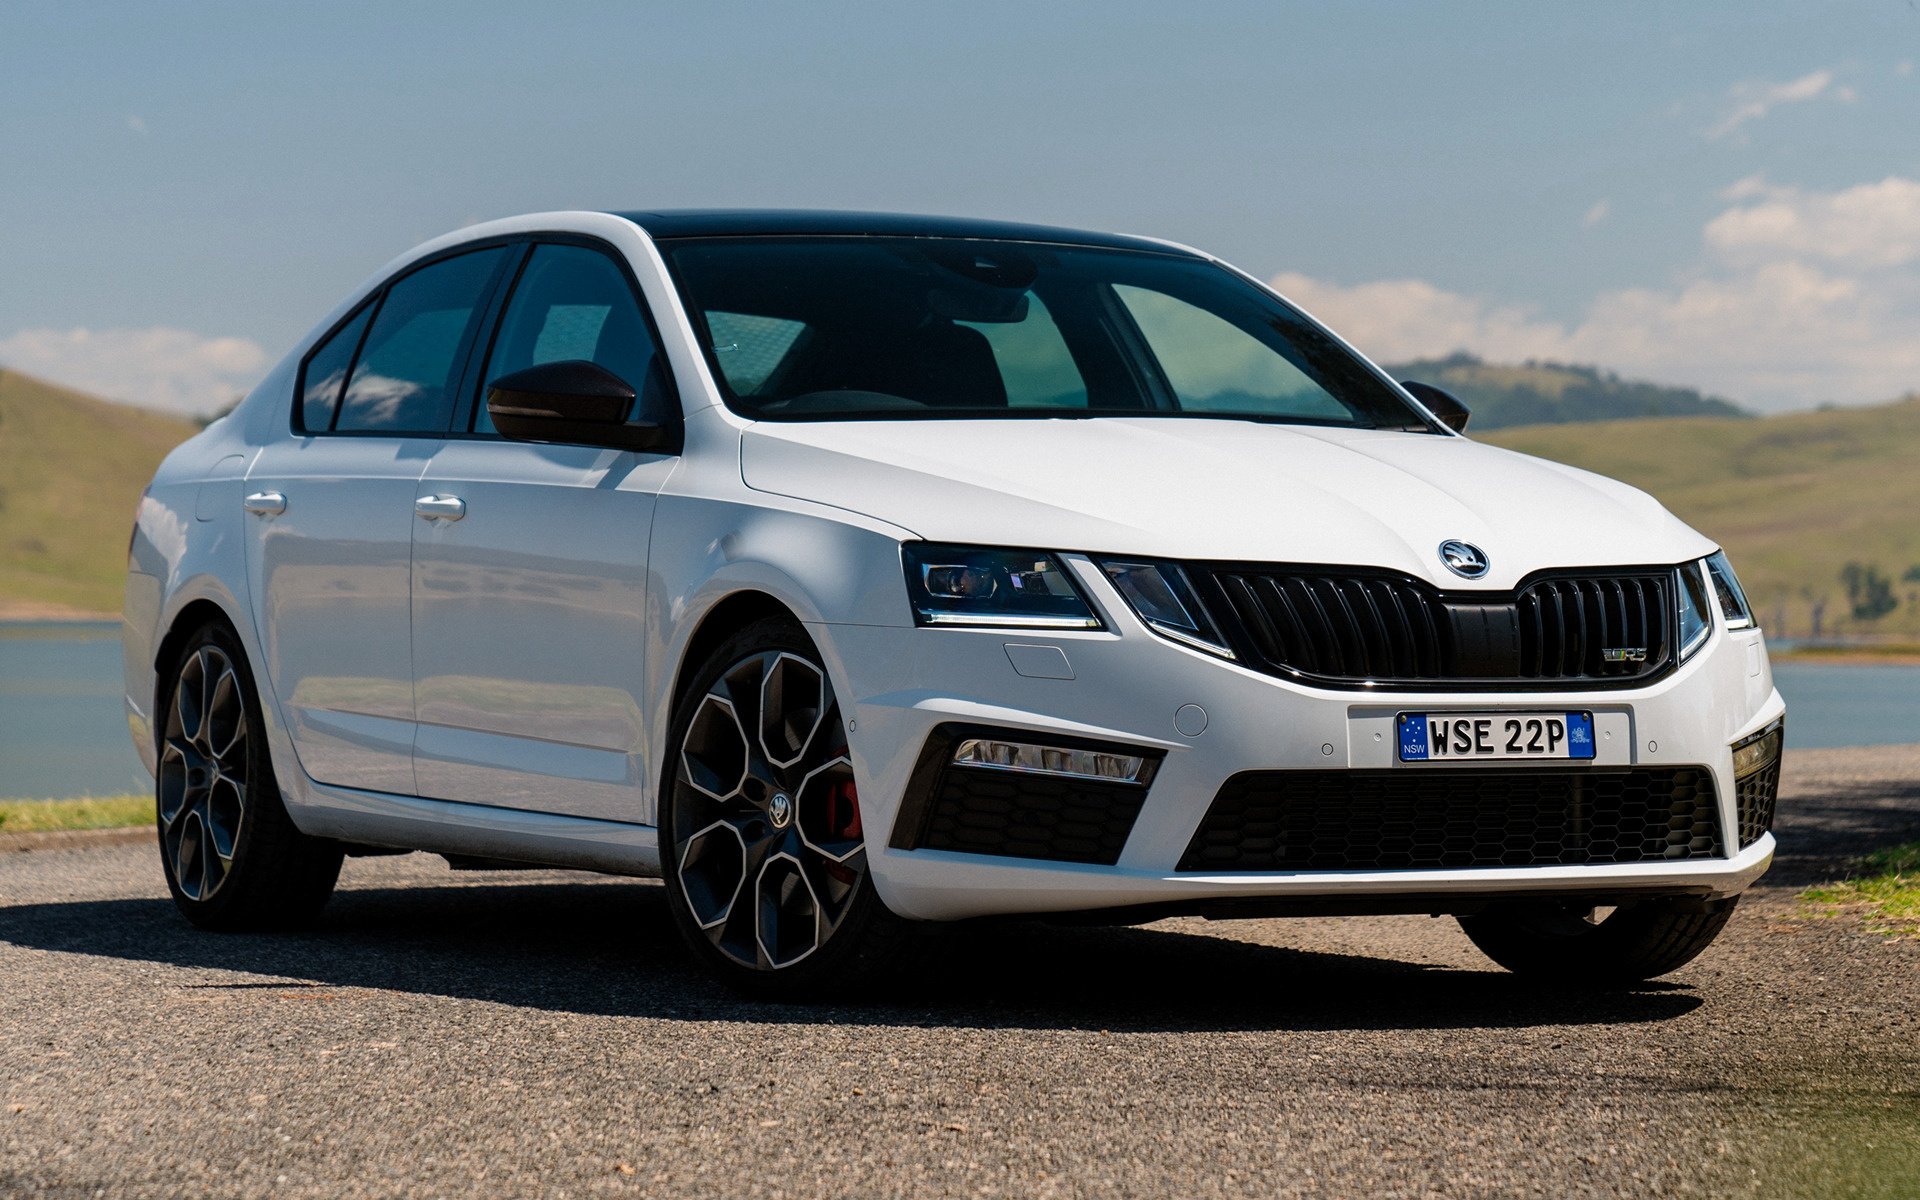 Skoda octavia rs 2017. Skoda Octavia a7 RS. Škoda Octavia RS a7.